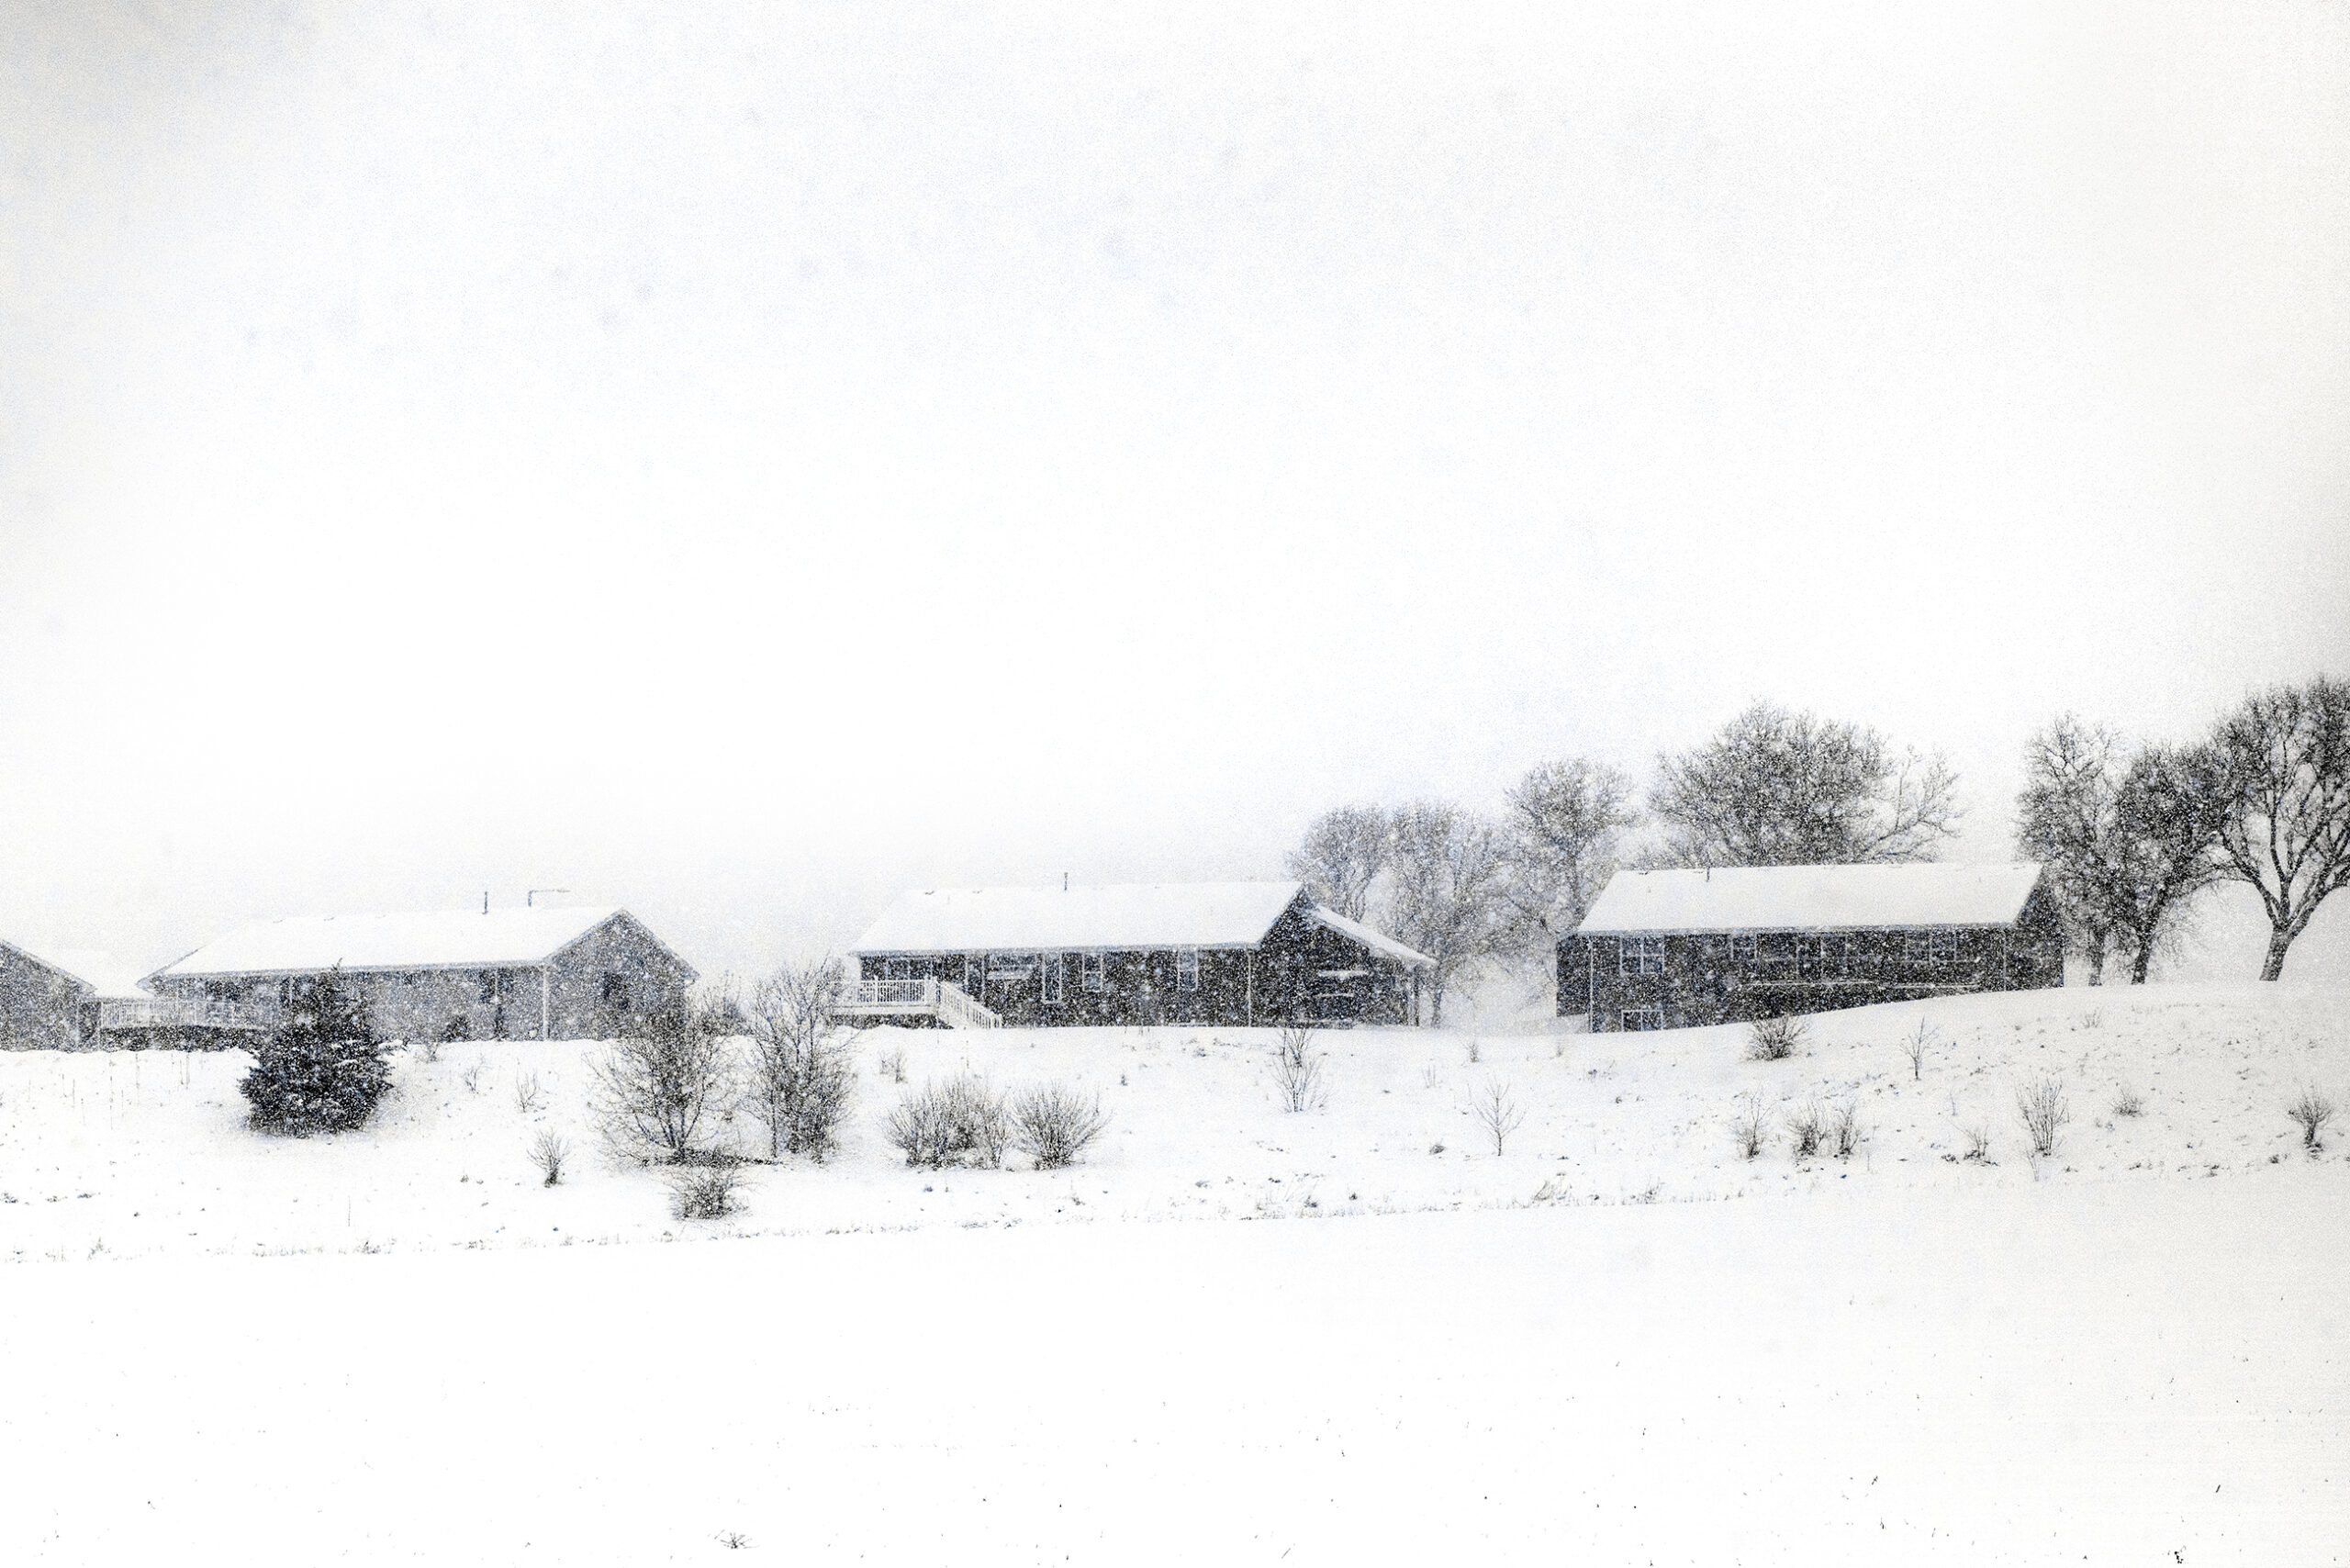 Three homes and trees can be seen in the distance through a heavy snowfall.